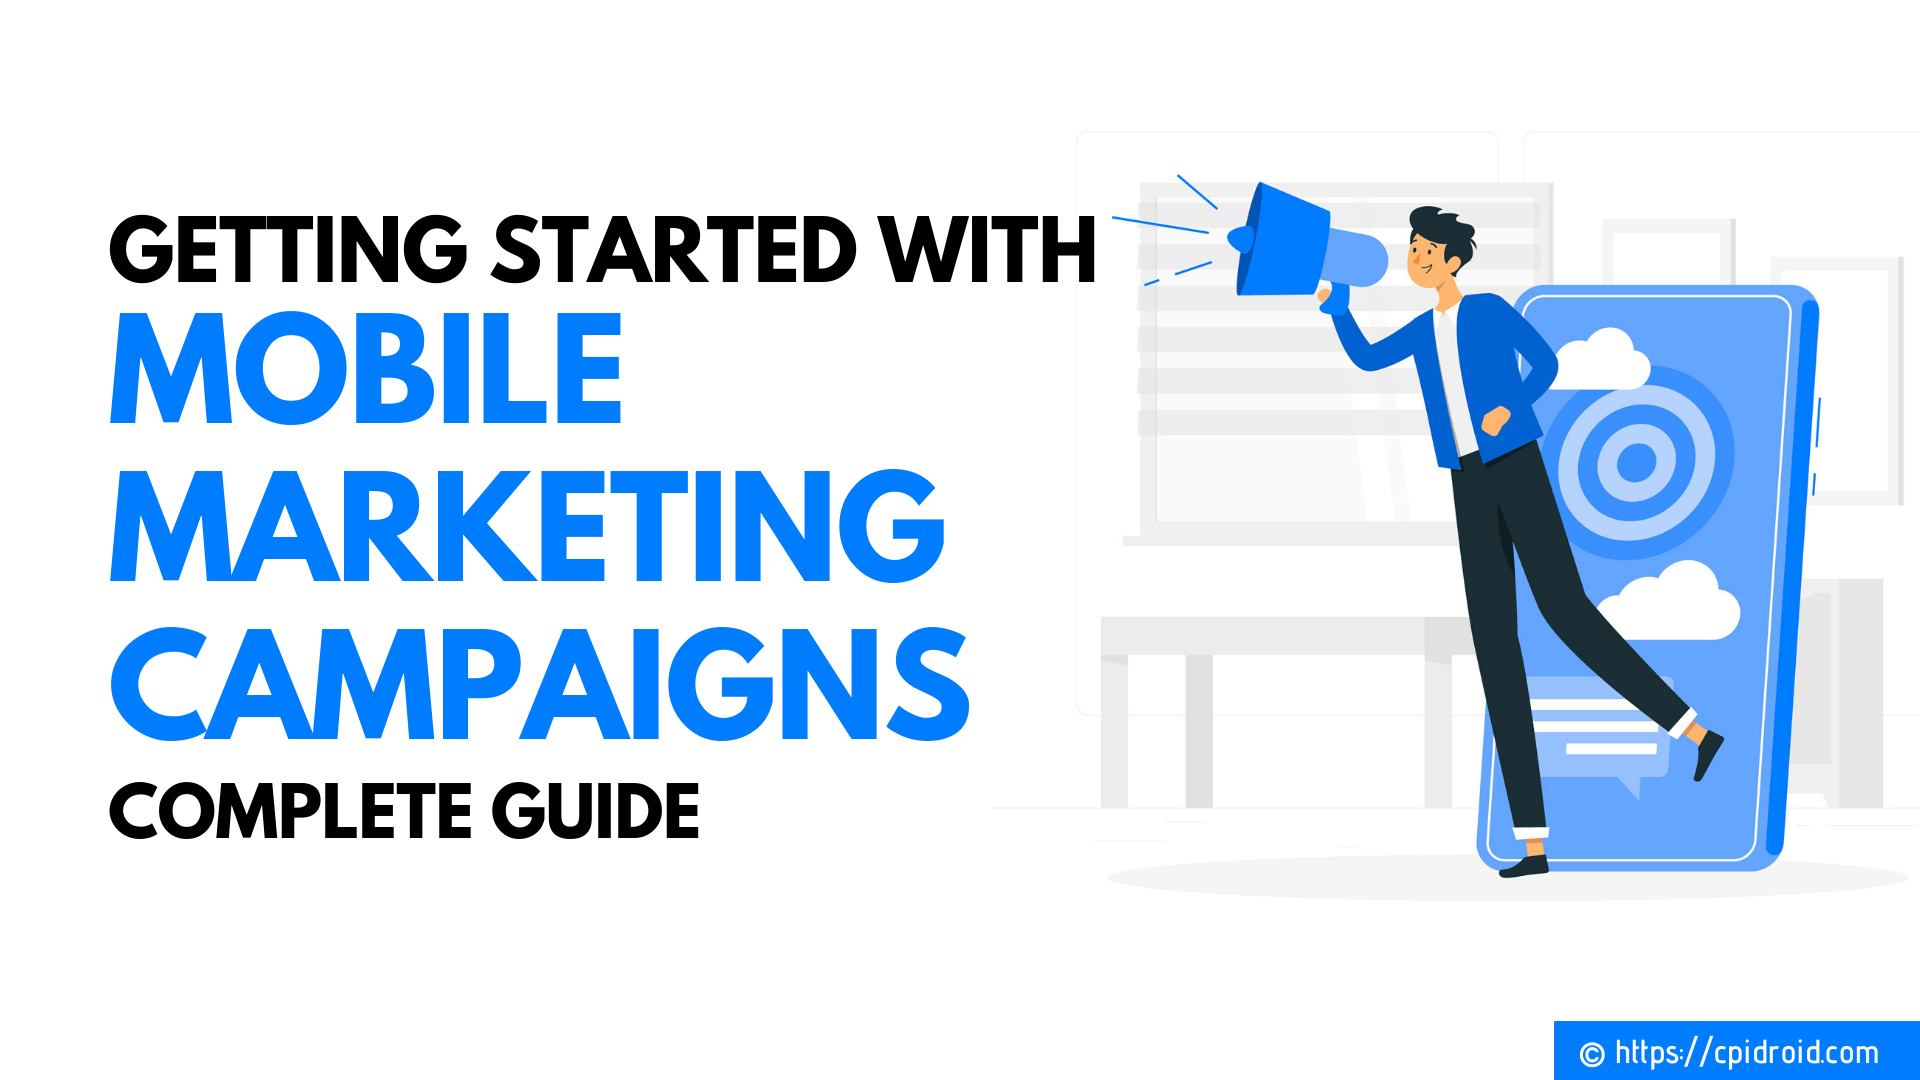 Getting Started with Mobile Marketing Campaigns - Complete Guide